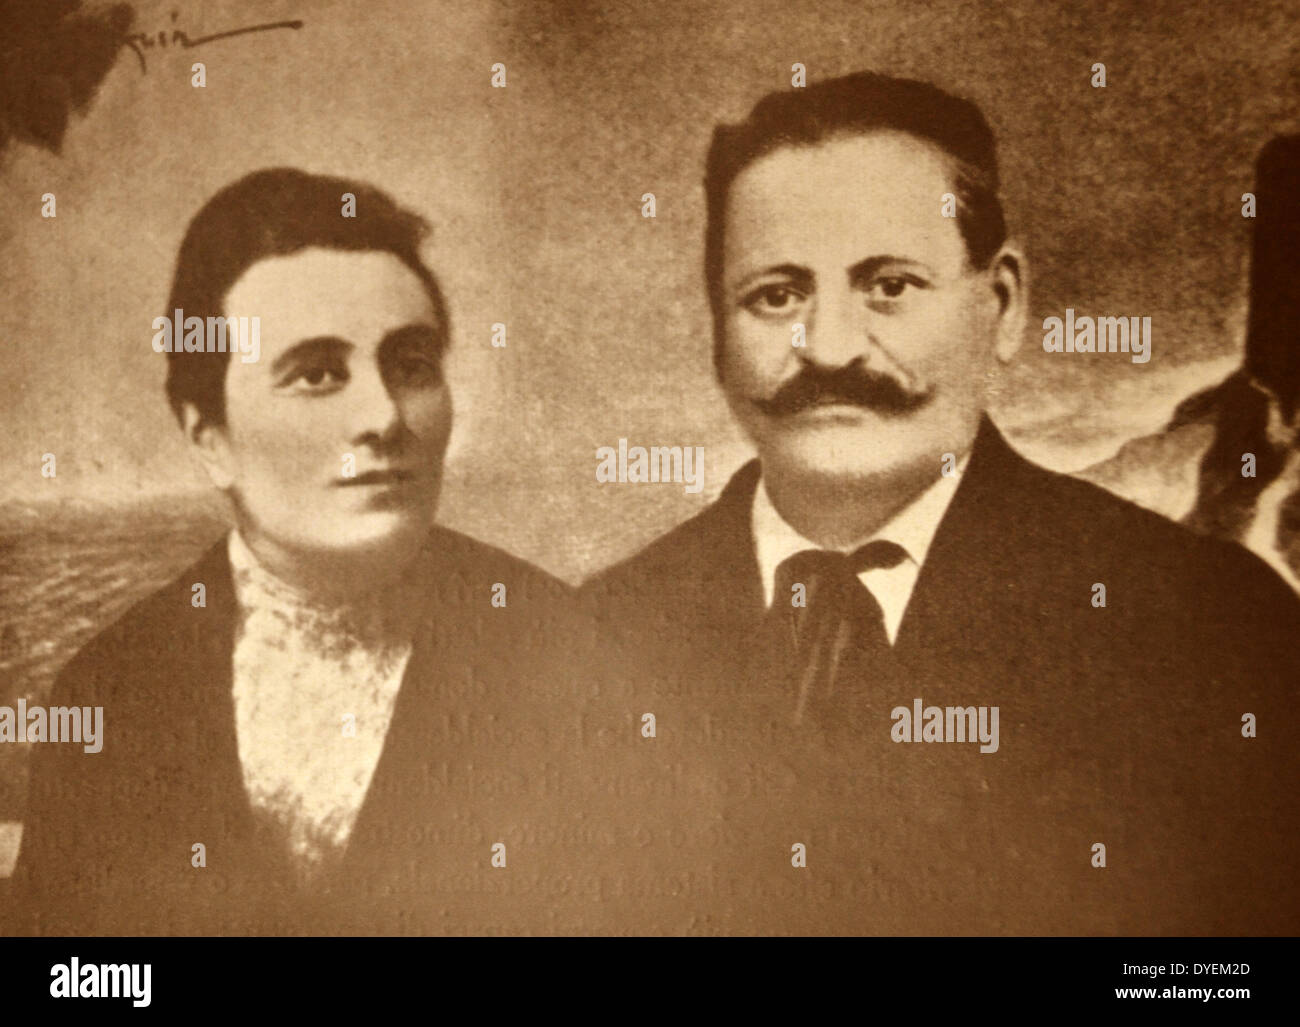 The parents of Italian Fascist leader Benito Mussolini. His father Alessandro Mussolini was a blacksmith and a socialist, his mother Rosa Mussolini was a devoutly Catholic schoolteacher. Stock Photo